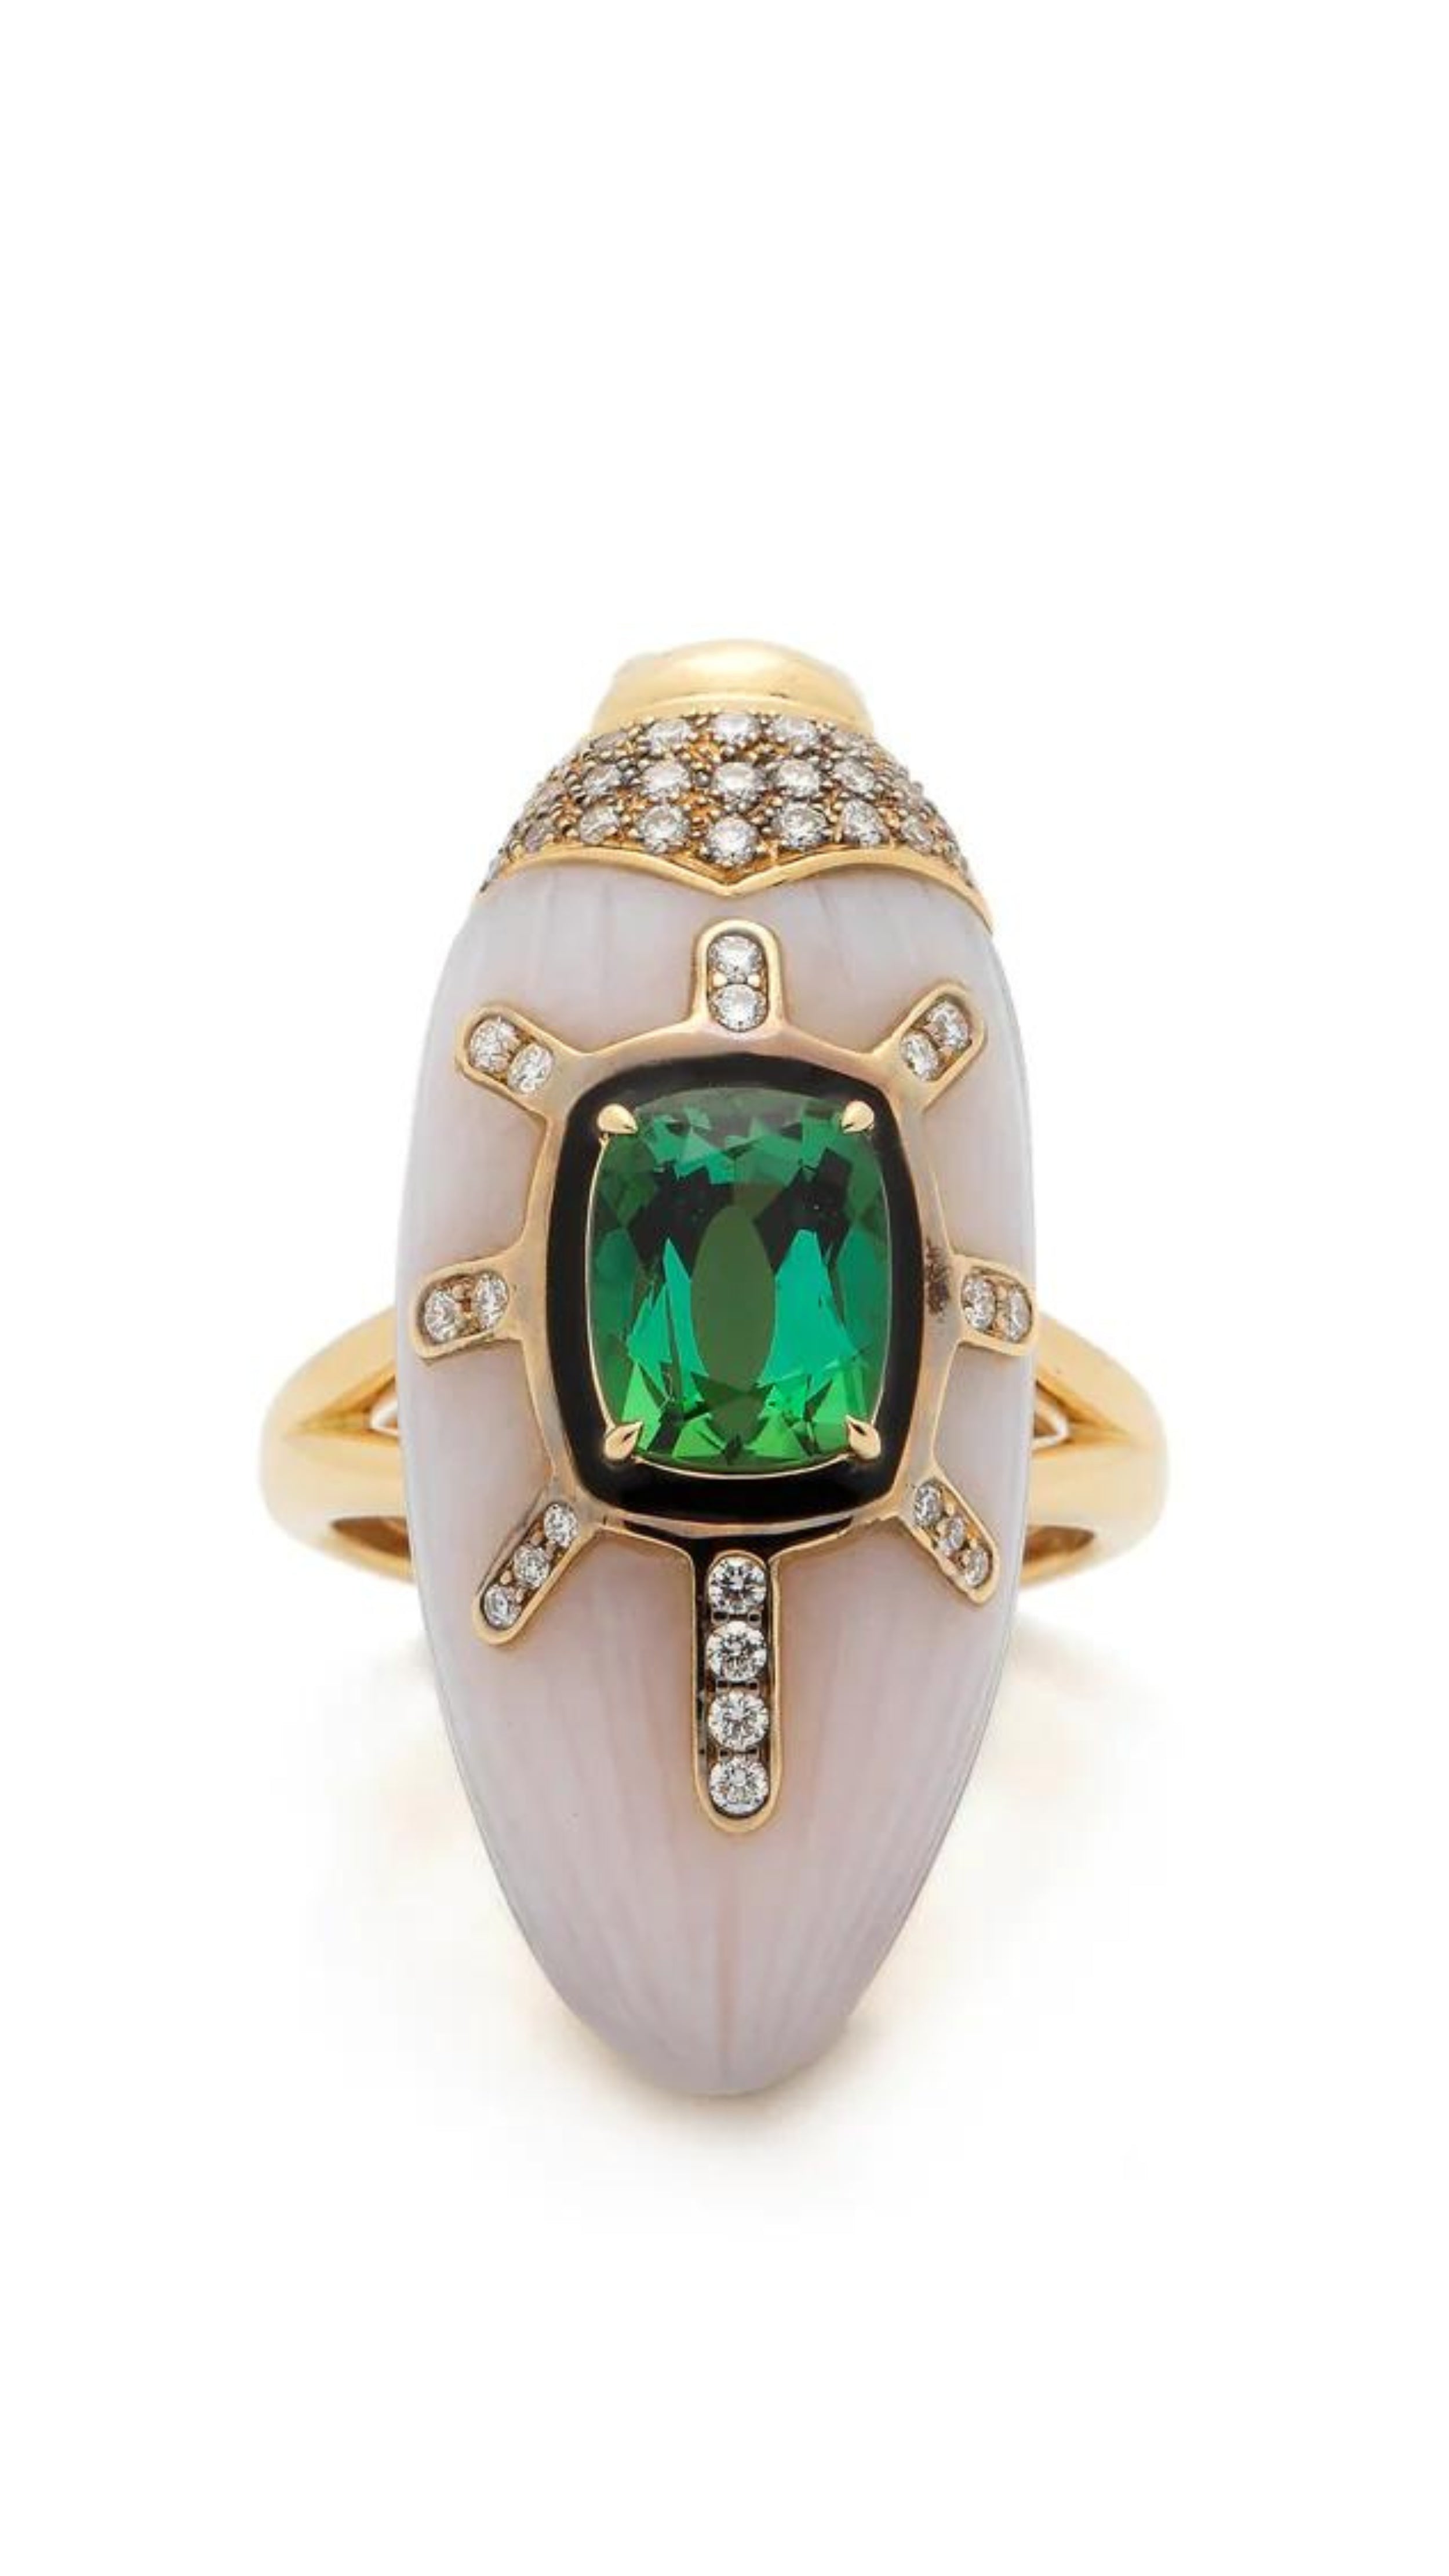 Bibi van der Velden Scarab Pink Opal Ring with Green Tourmaline. Art deco style large statement ring carved into a scarab shape from pink opal. Inlaid with green tourmaline and pave set diamonds adorn the front. Sustainable jewelry. High jewelry collections. Cocktail ring. Ring shown from the front view.